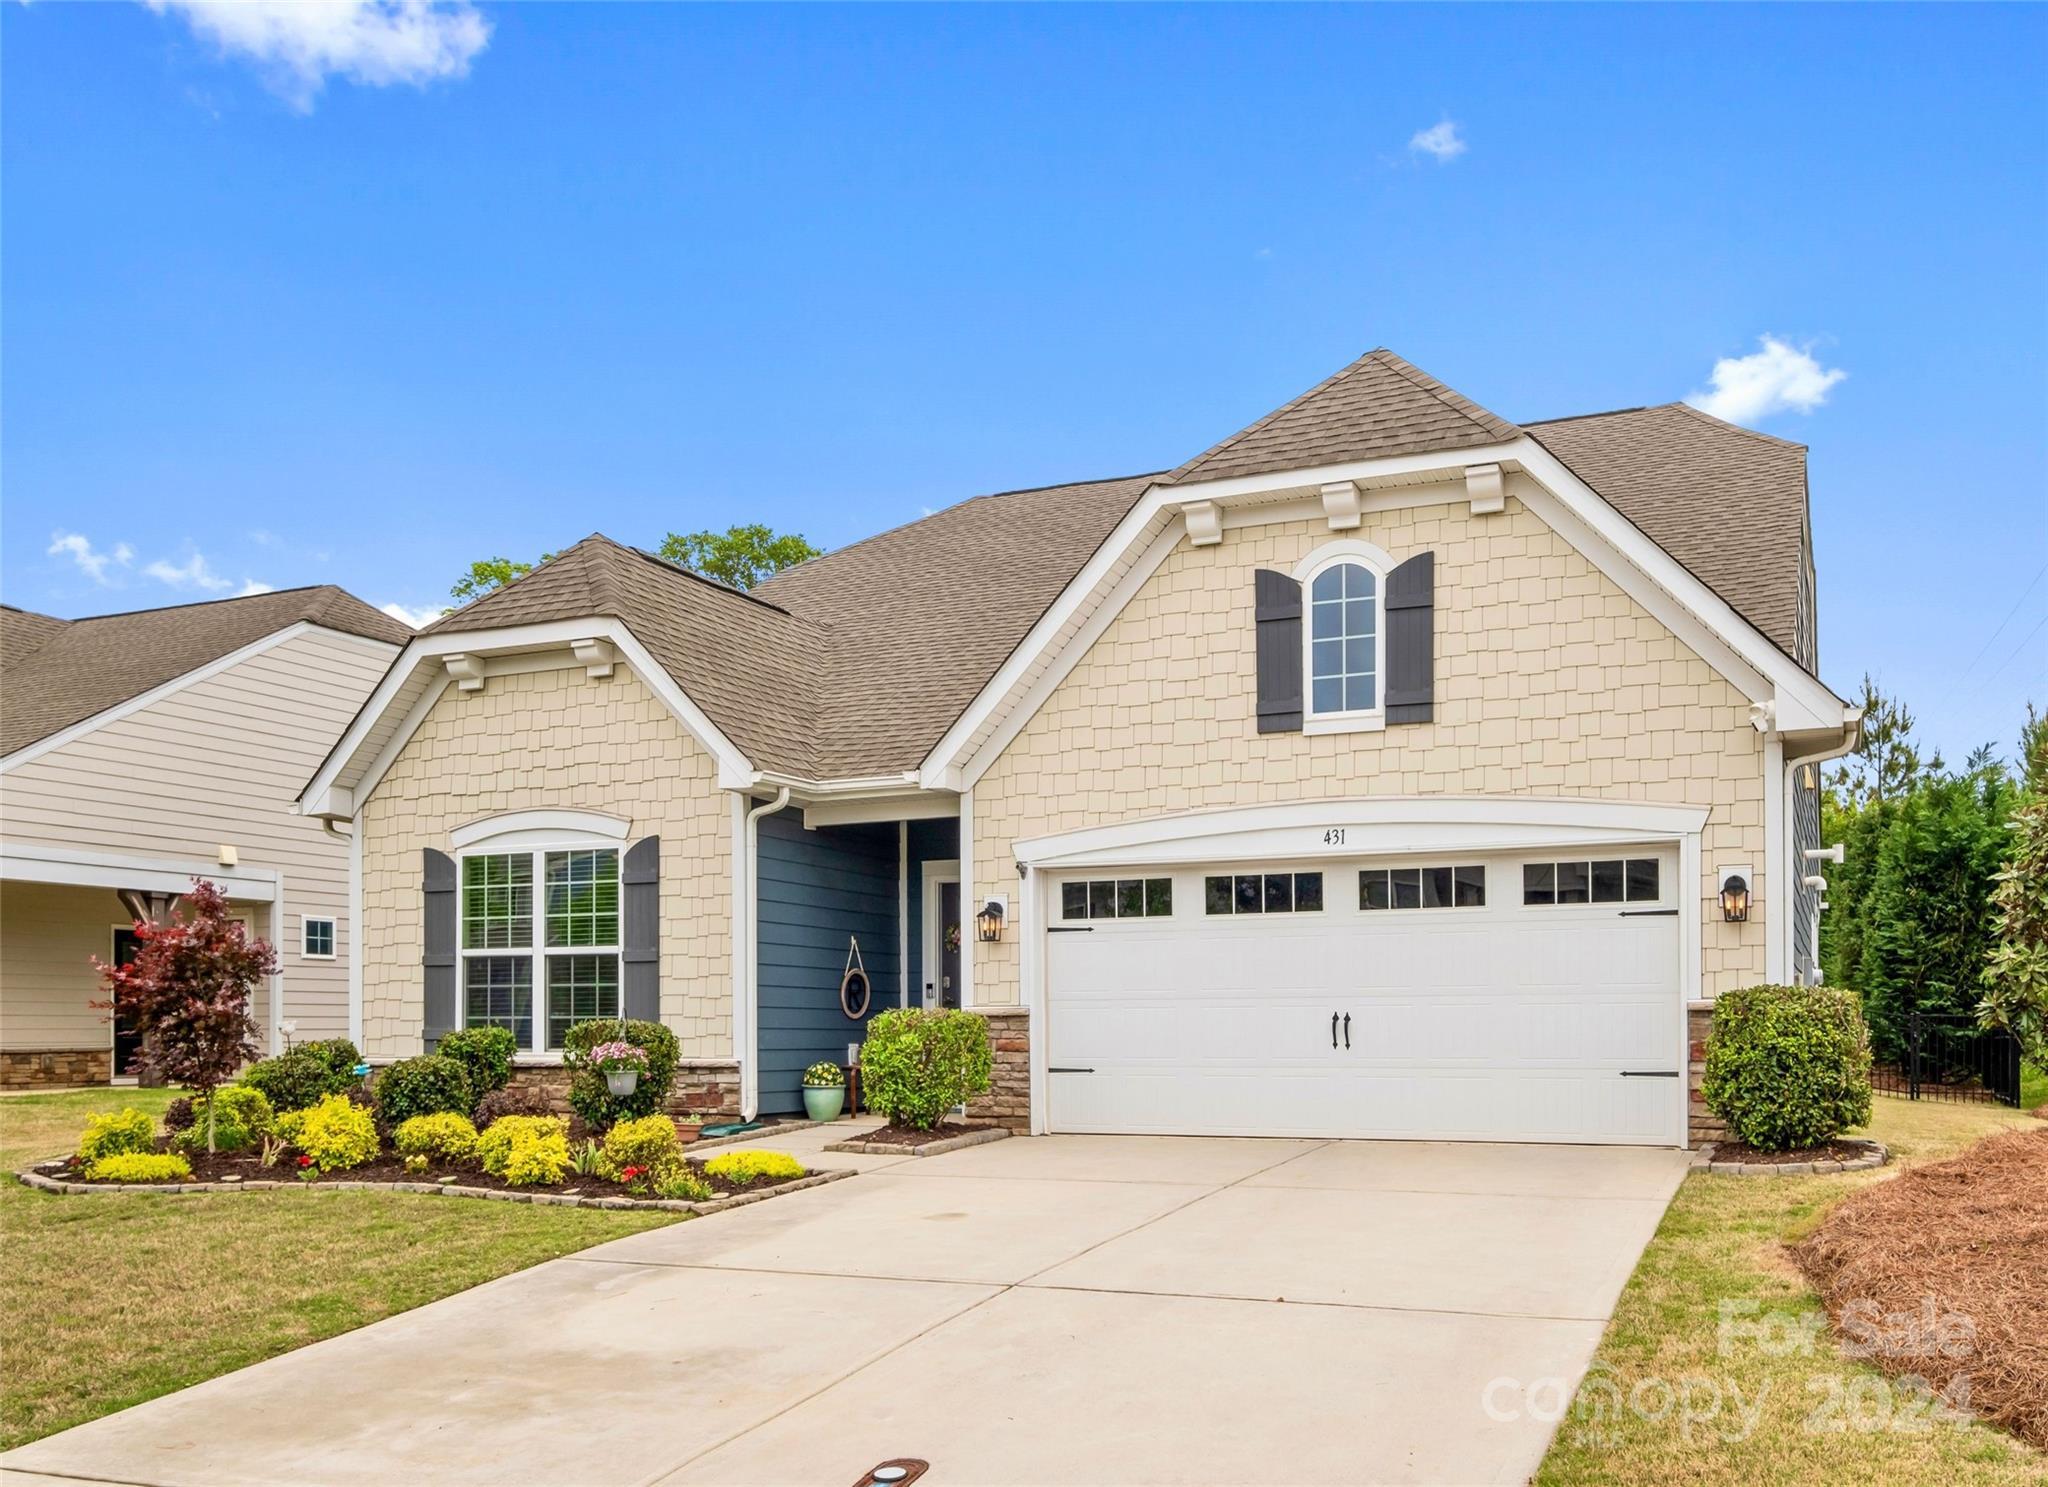 Photo one of 431 Kentmere Ln Clover SC 29710 | MLS 4129223